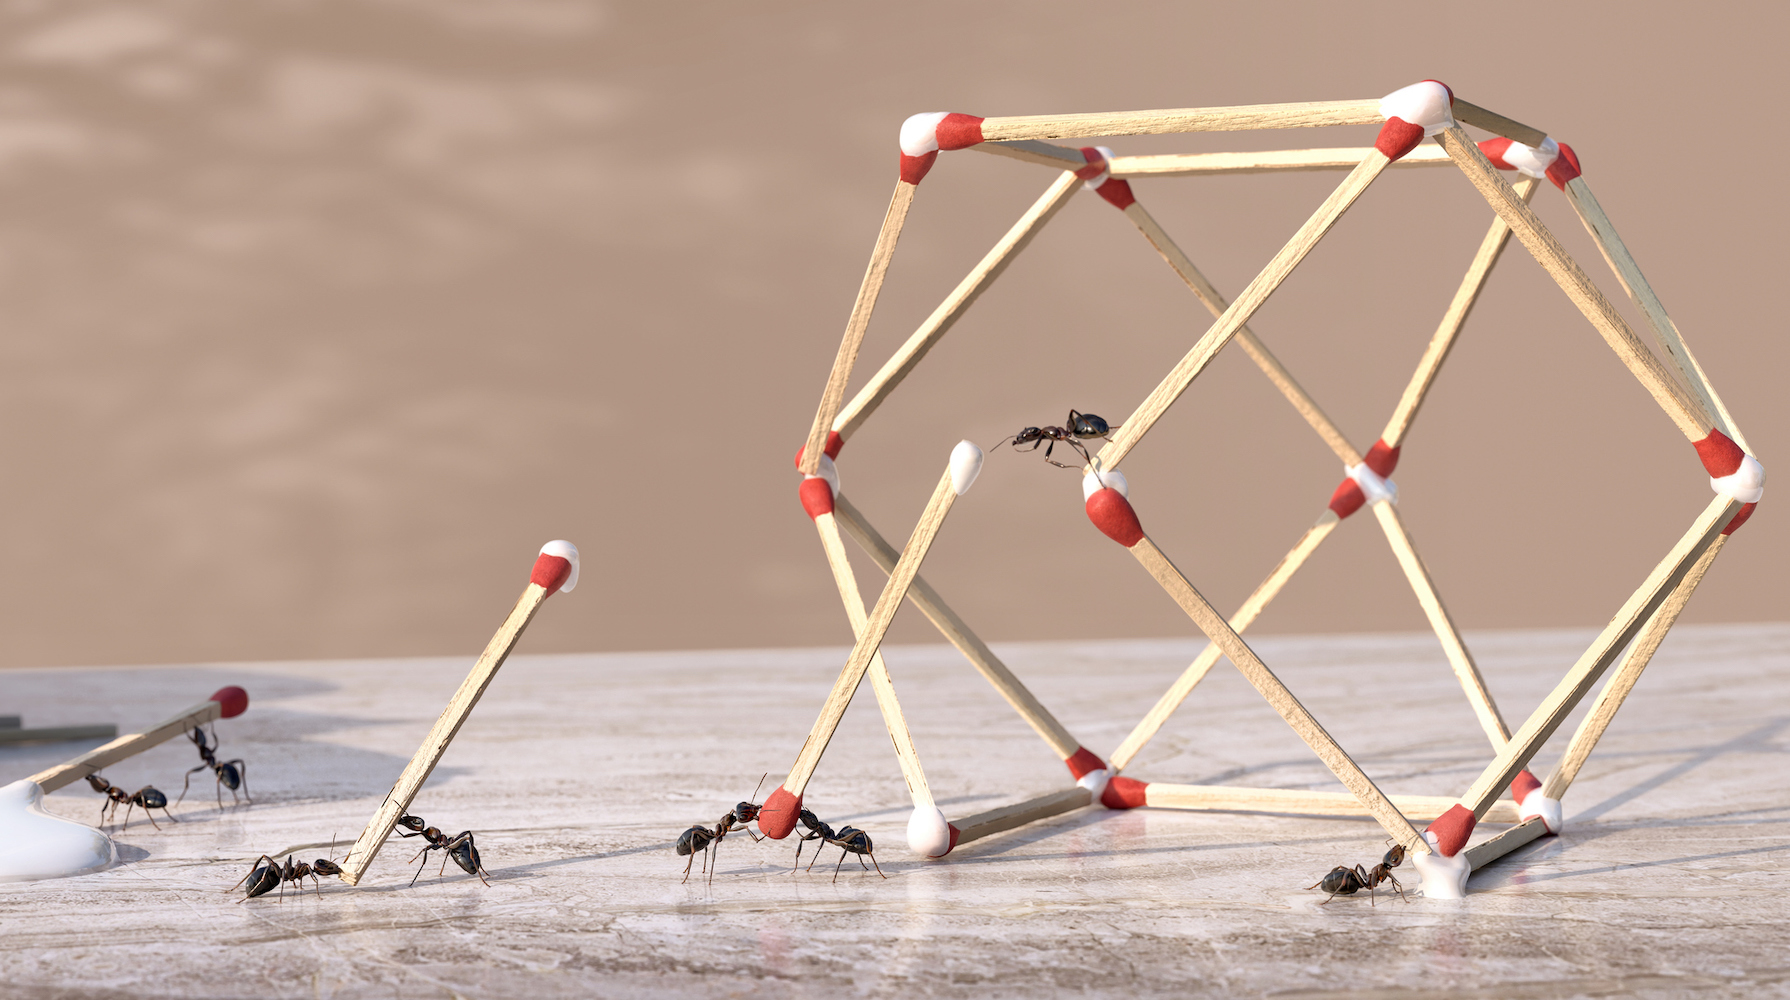 A group of ants working as a team to form a three-dimensional geometric sculpture of glue and matches.  The ants dip matchsticks in glue dripping from a match bottle and place them in place to create the shape on the marble work.